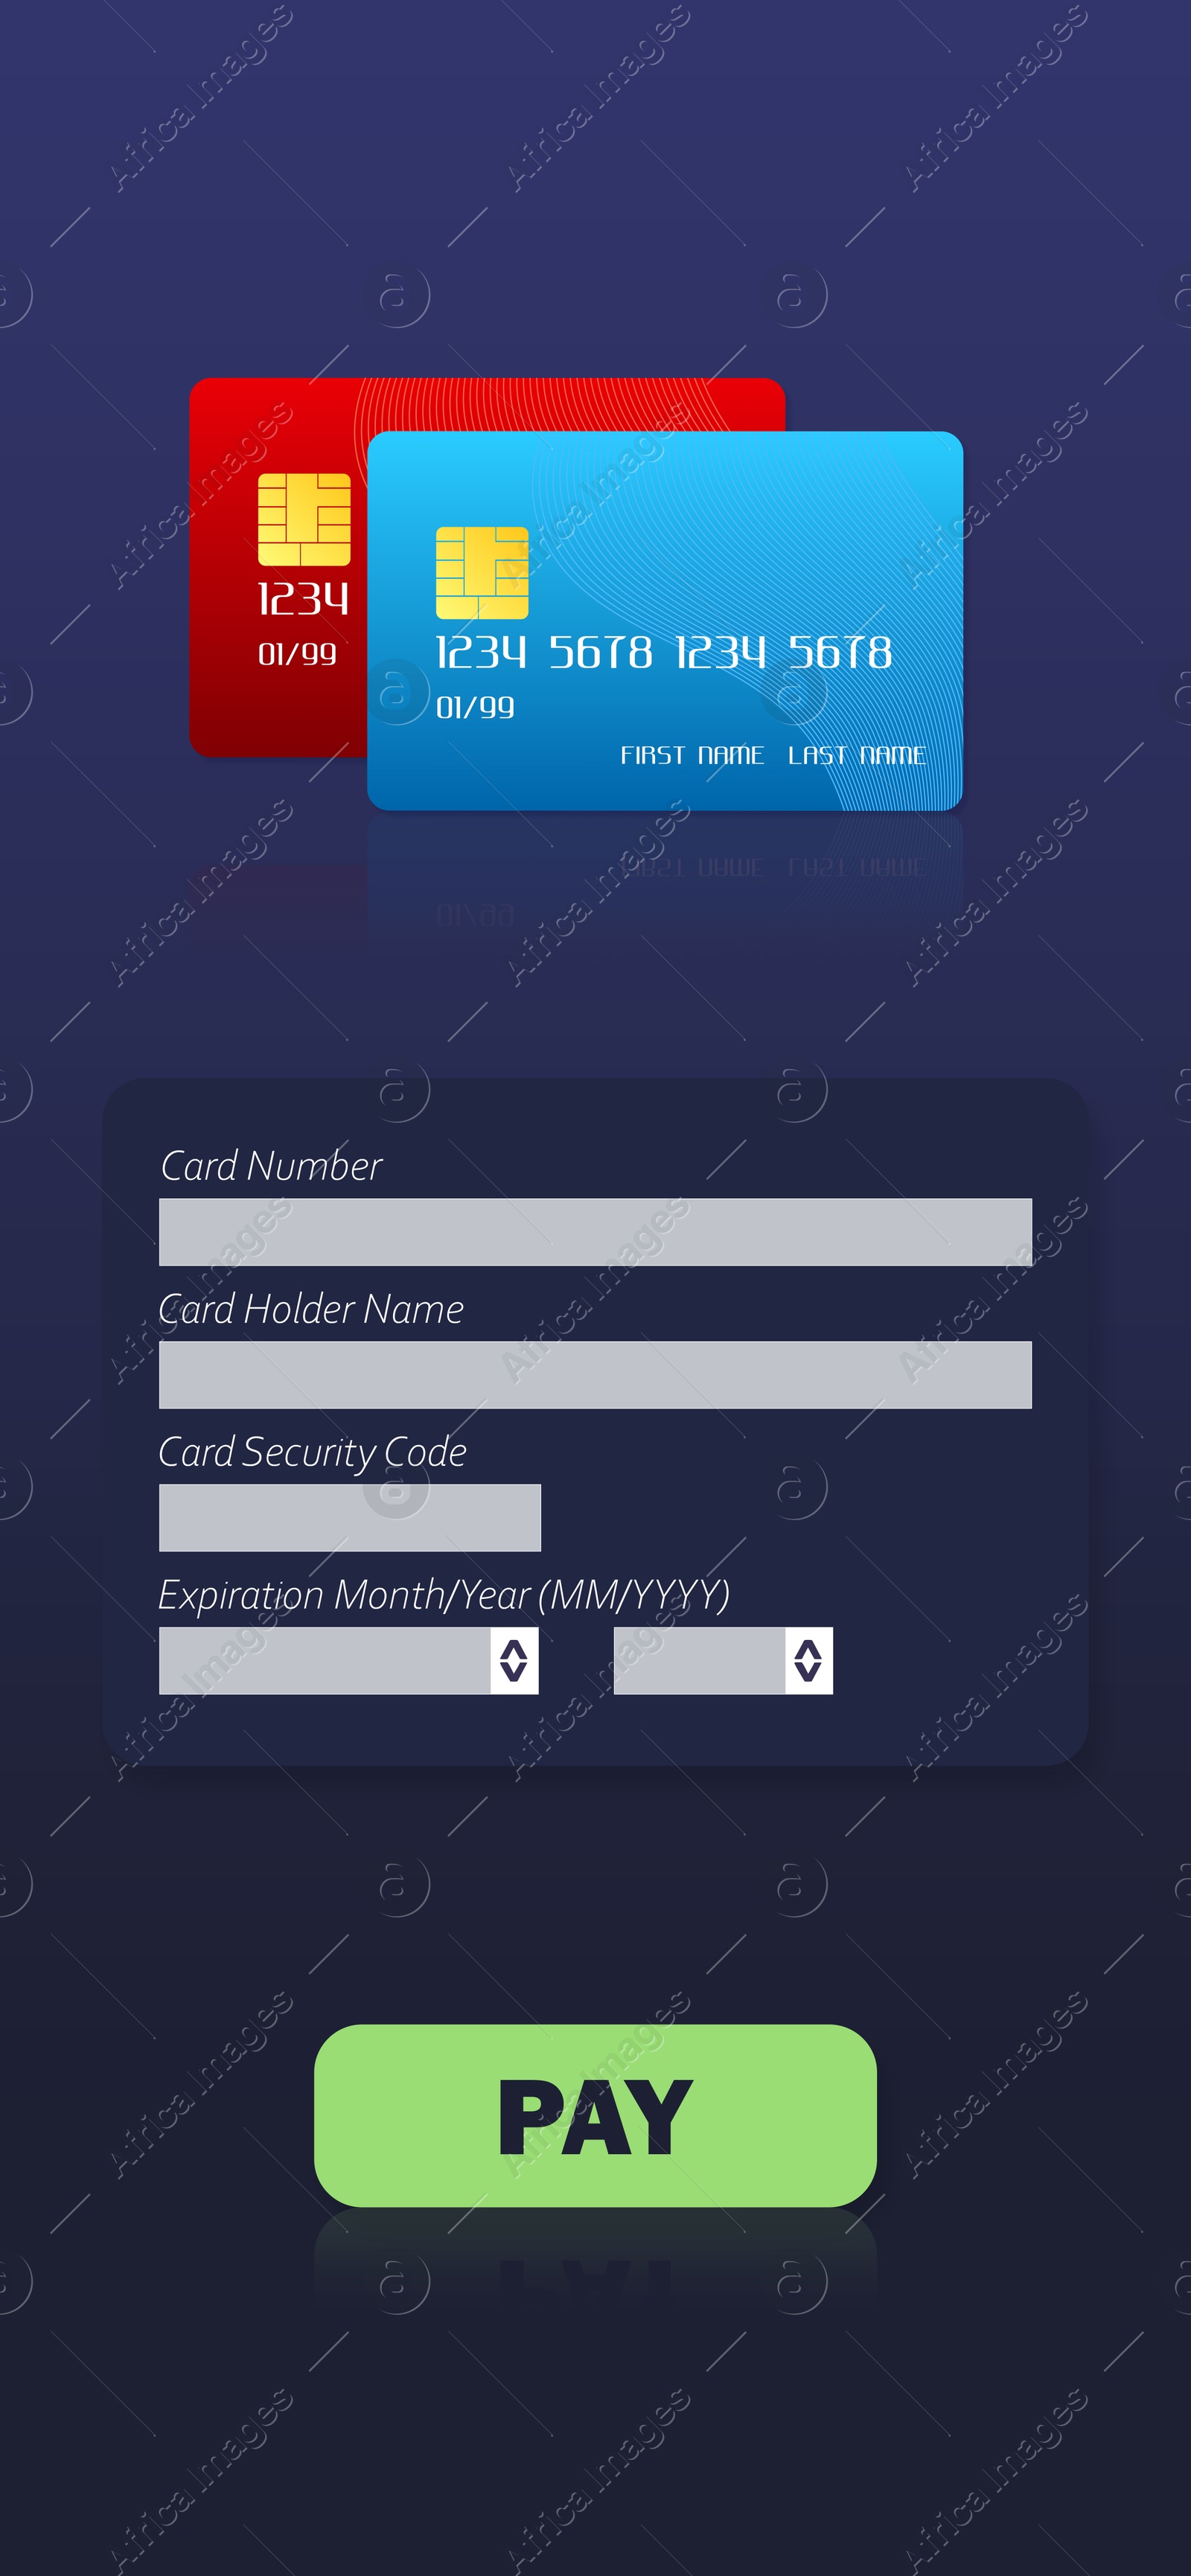 Image of Online payment application screen with data entry fields on dark blue background, illustration